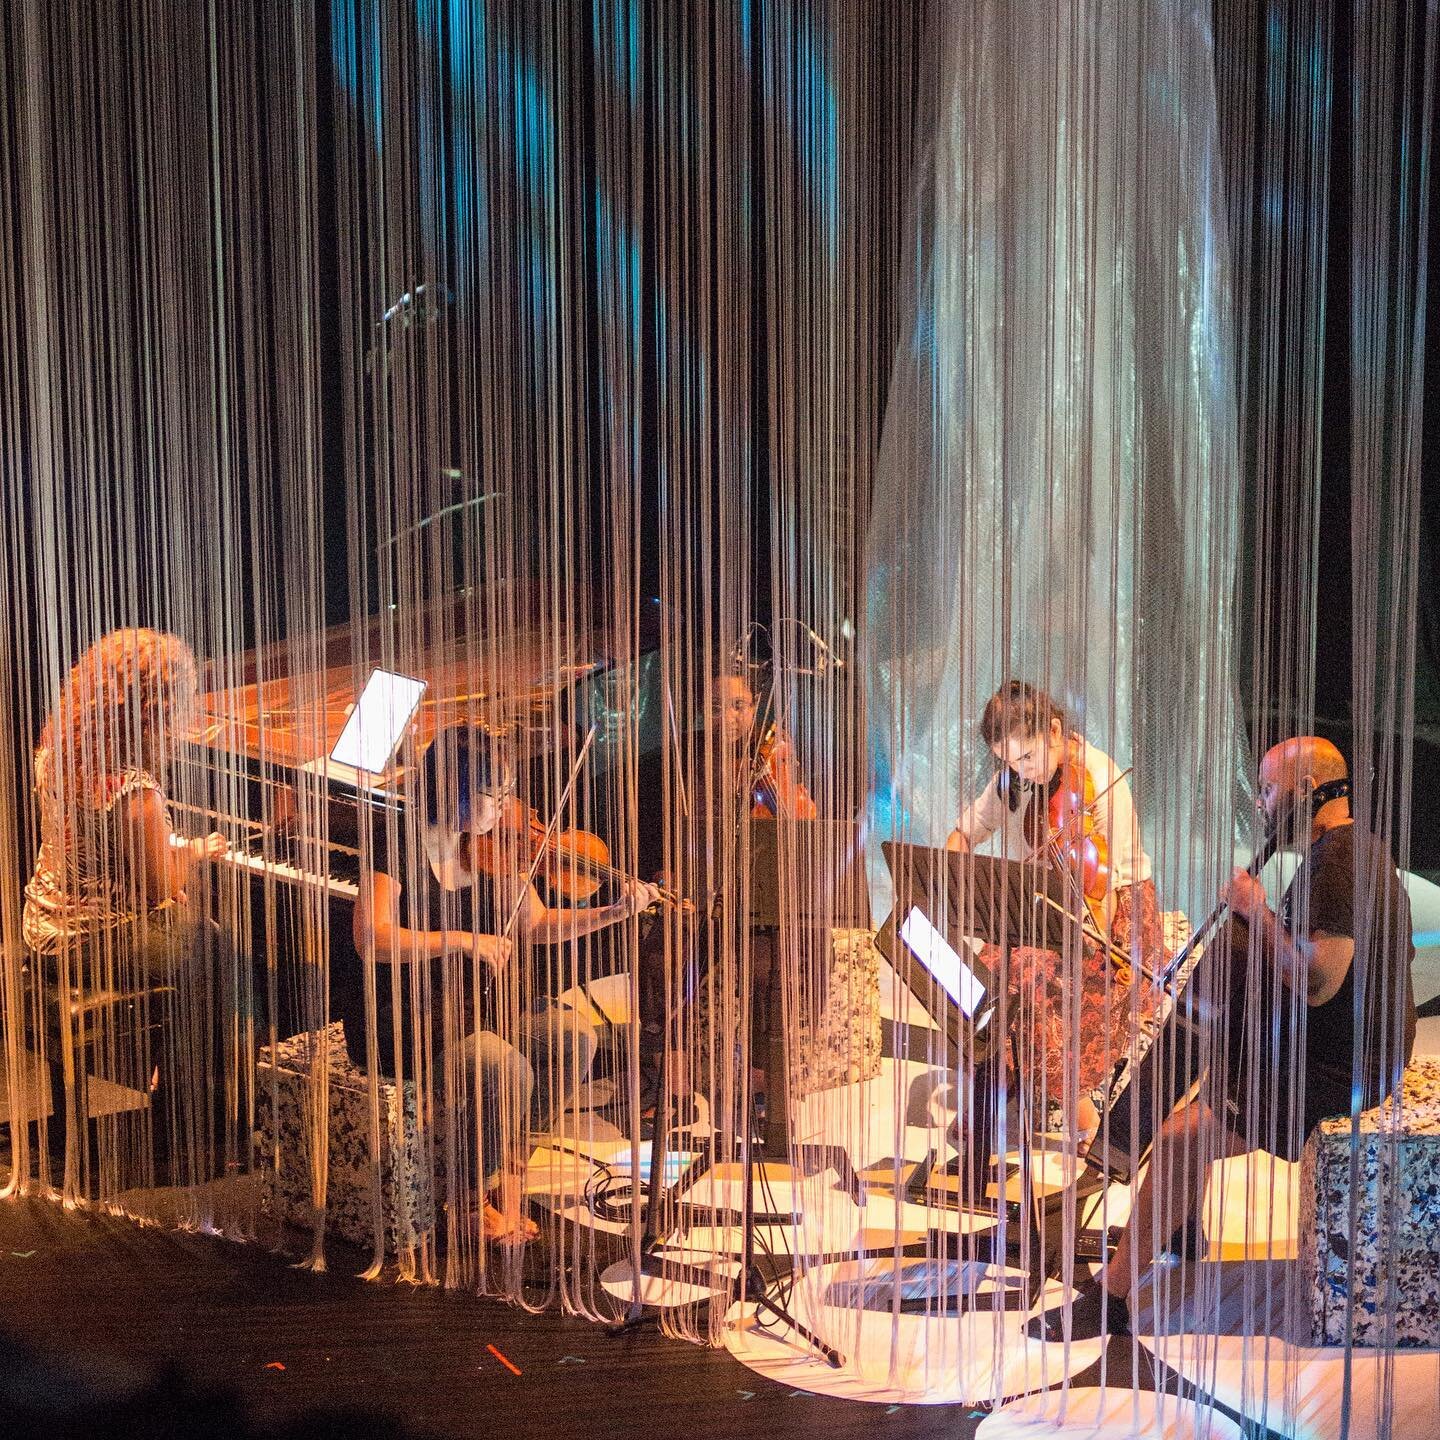 Listen to visionary original composition played by an amazing group of musicians. Anthropic Traces previews tonight @crowstheatre and runs until July 31. Tickets at the link in our bio.